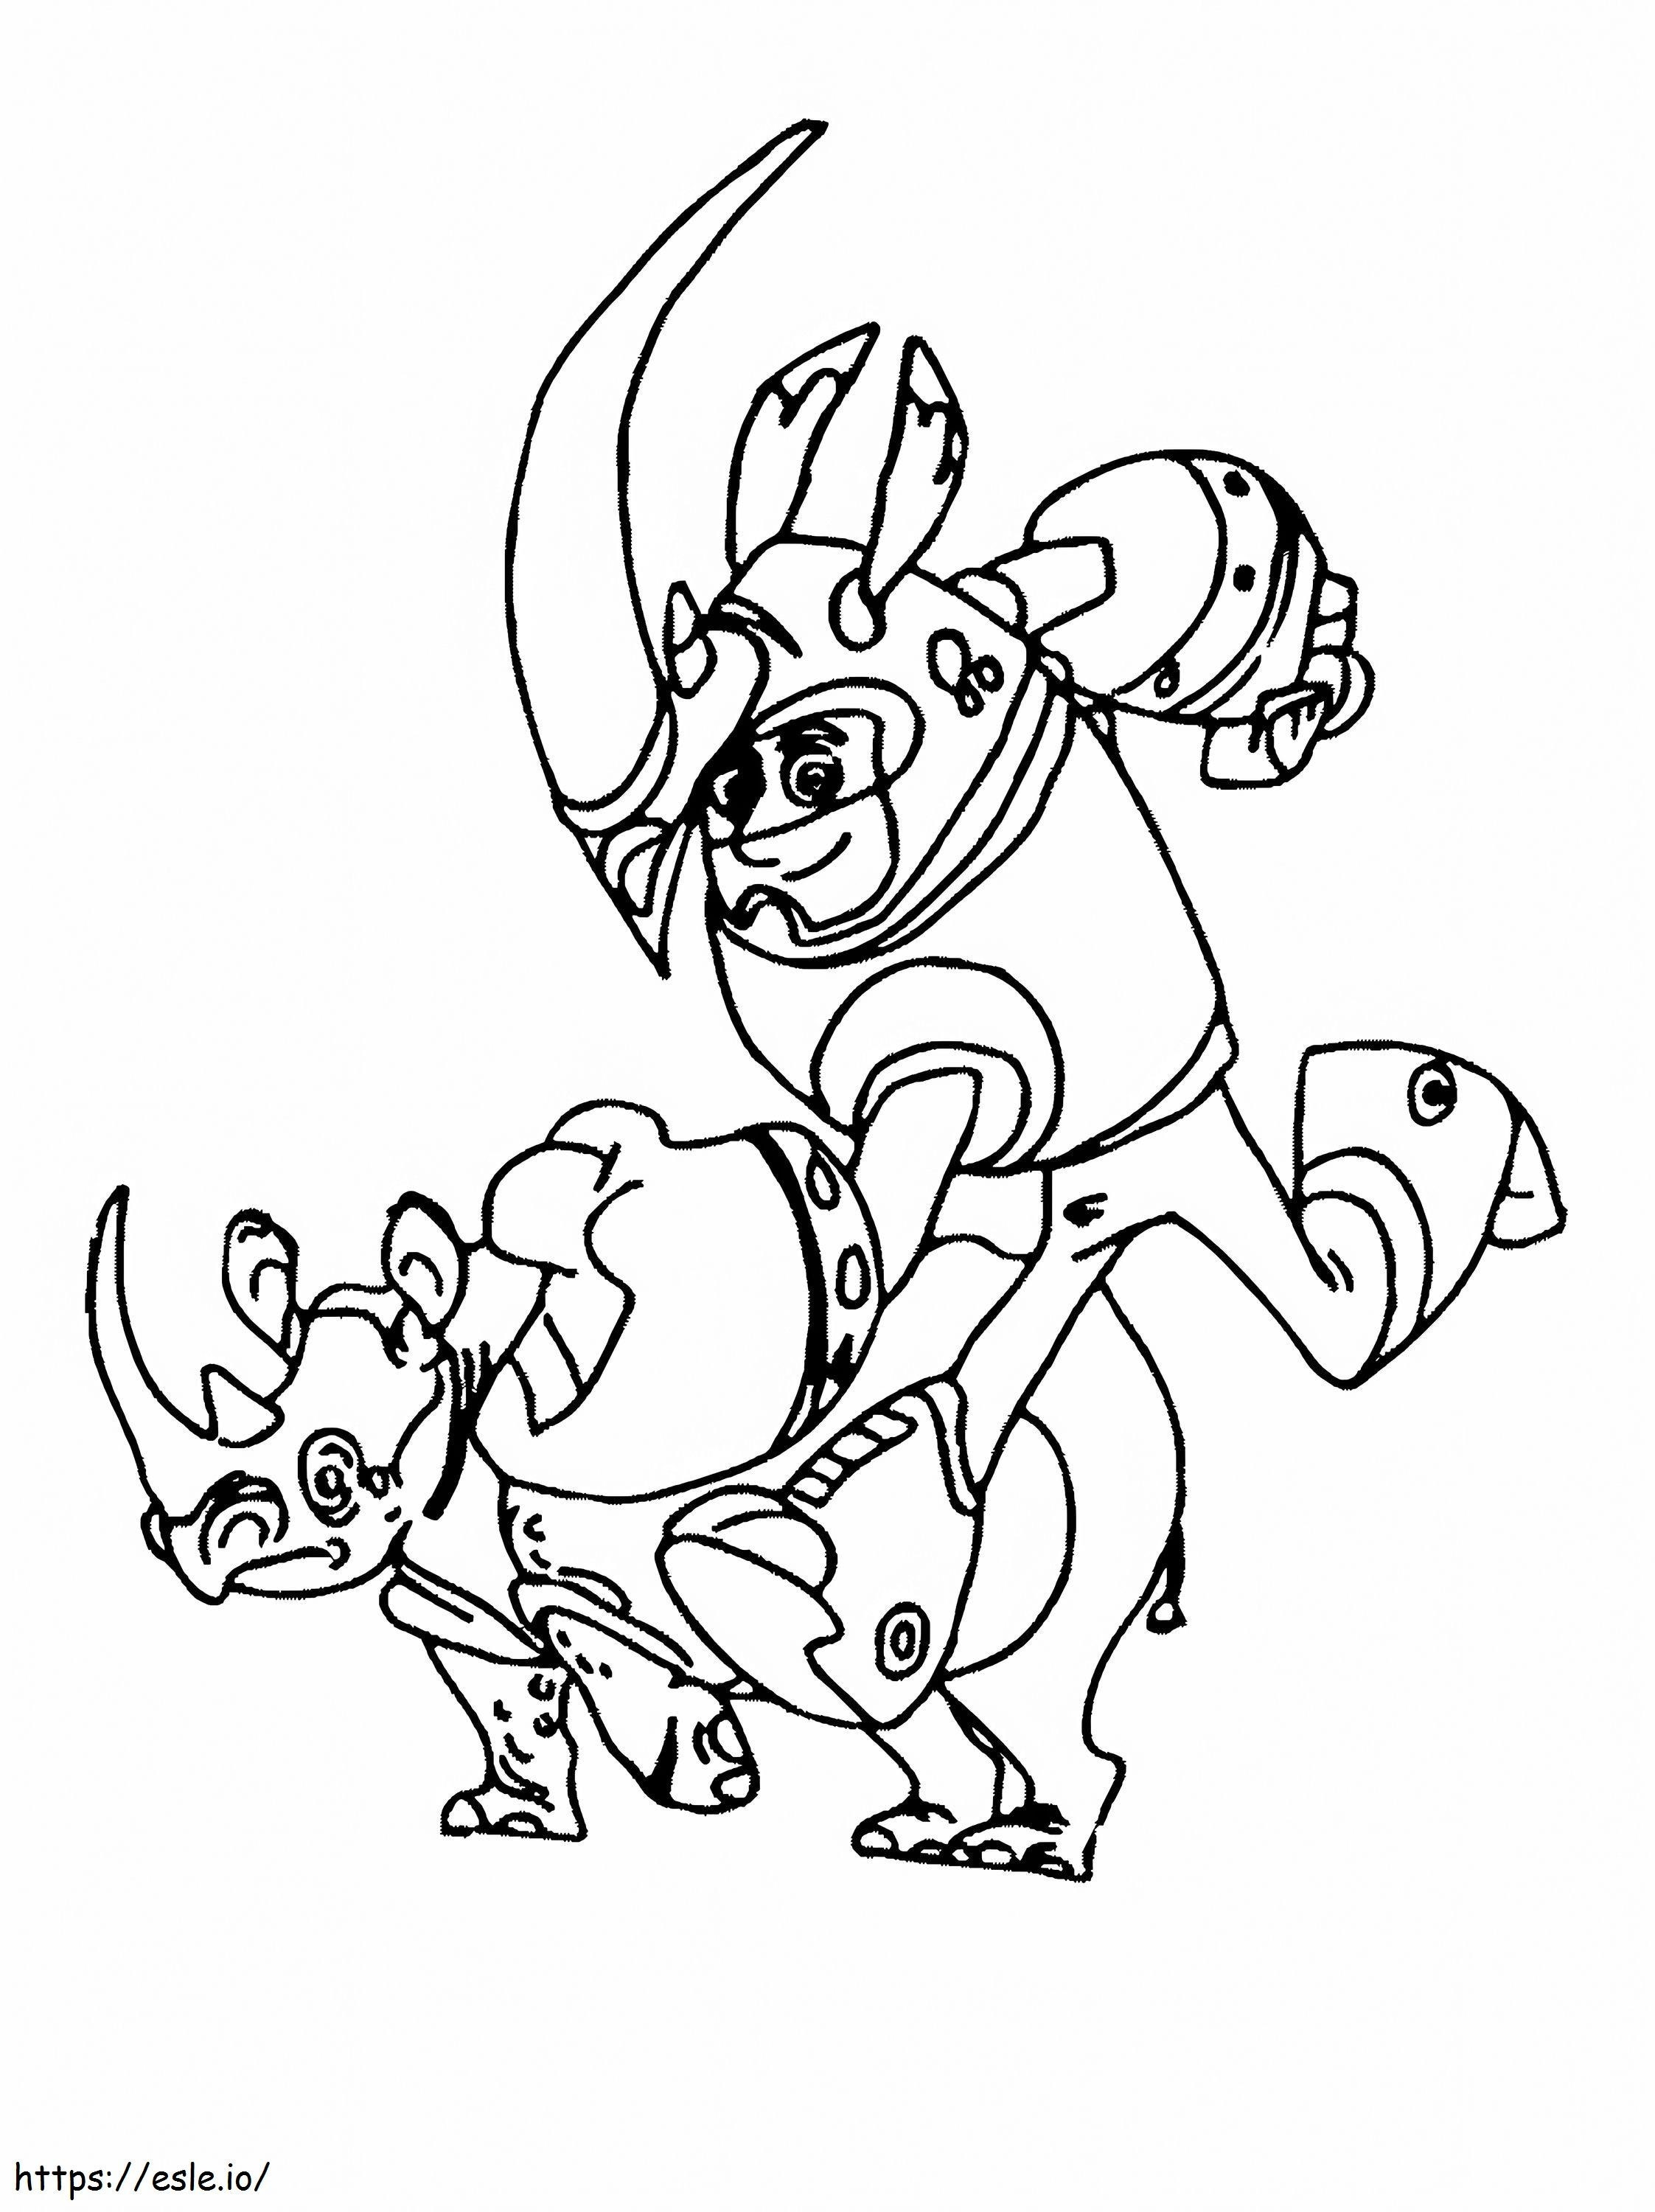 1582794811 Wild Kratts Games Pictures Free Of The Creature Power Suits To coloring page